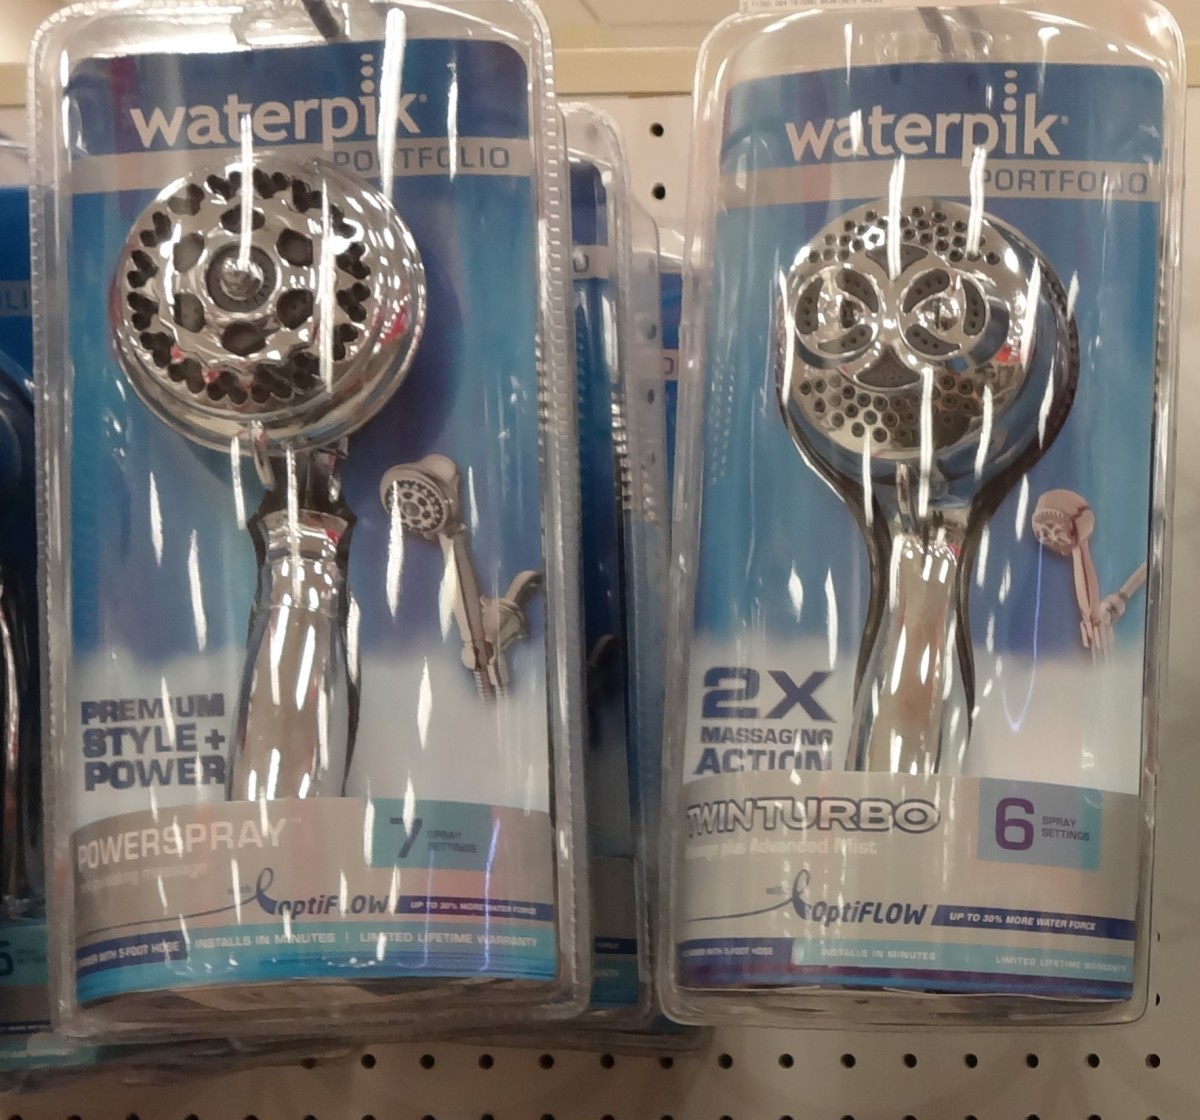 A new shower head can be a nice pampering gift for mom, but make sure you offer to install it for her too.